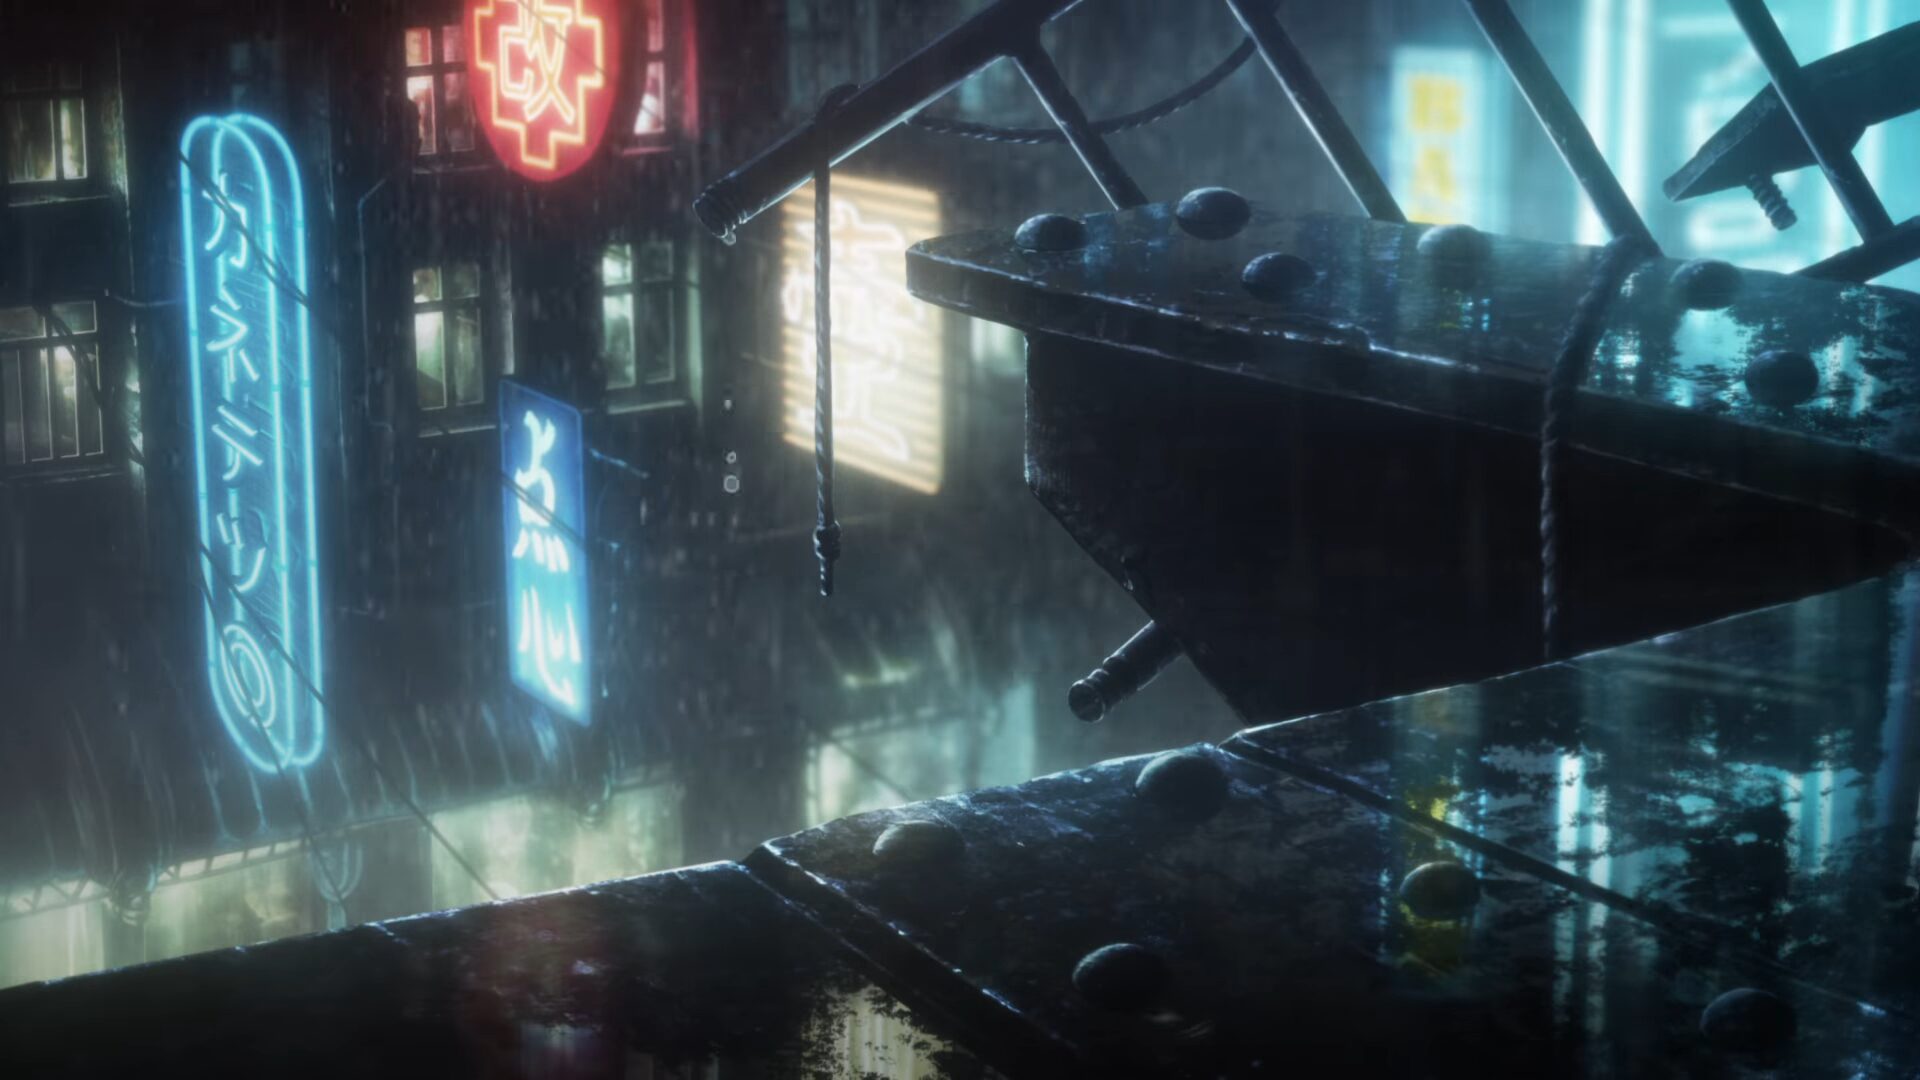 Blade Runner Anime Series Being Made In Joint By Adult Swim, Crunchyroll